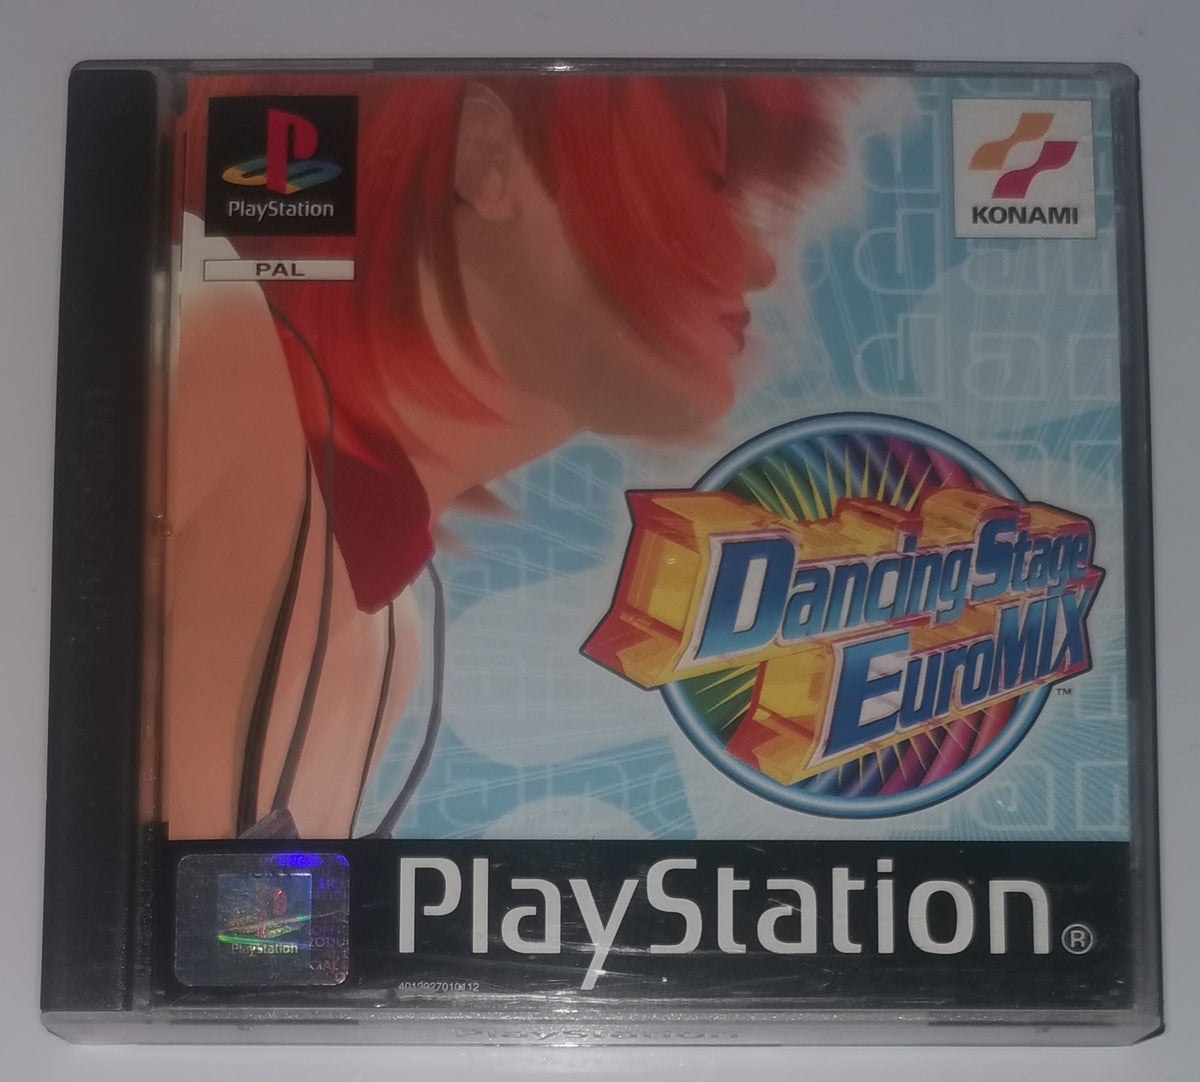 Dancing Stage Euromix Pal (Playstation 1) [Sehr Gut]